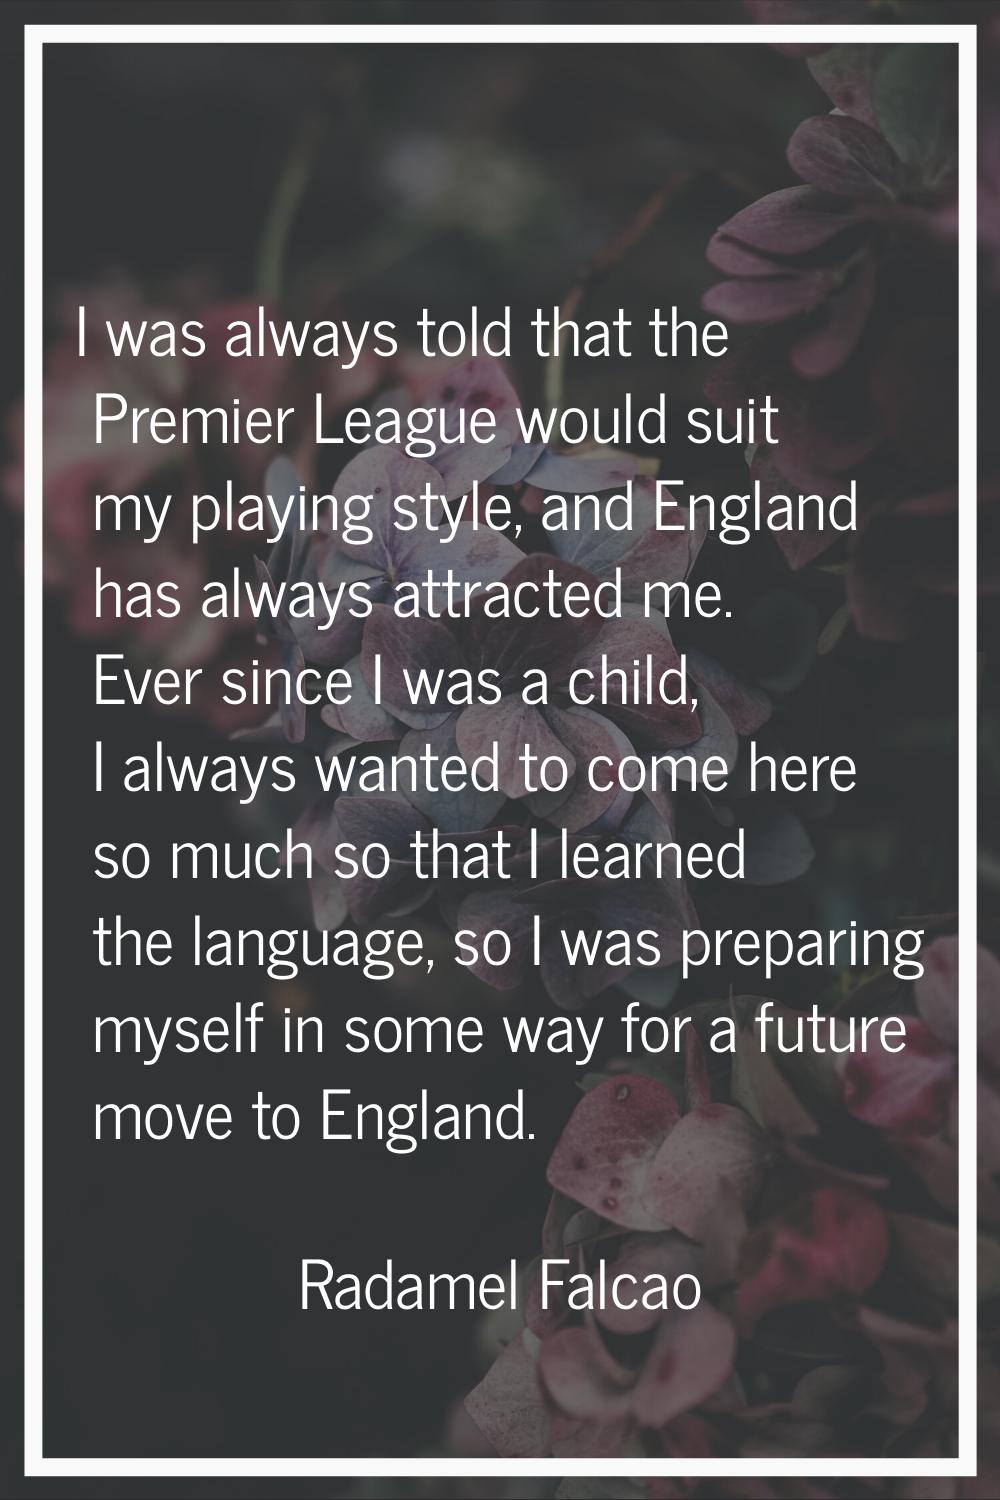 I was always told that the Premier League would suit my playing style, and England has always attra